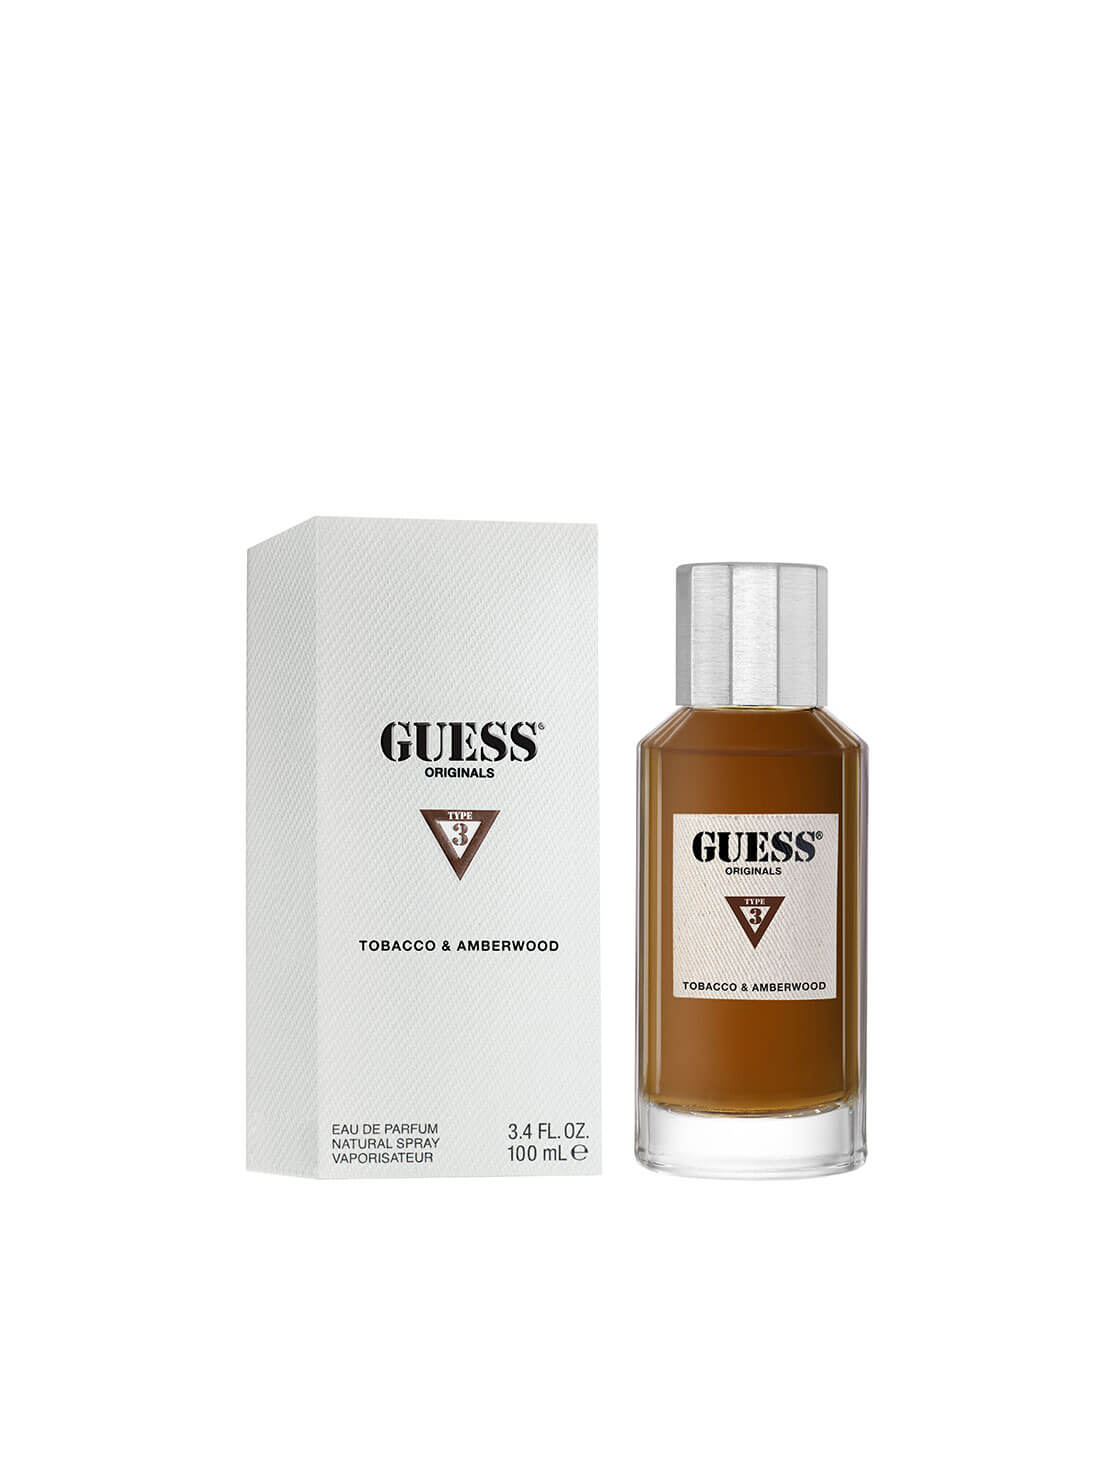 Guess Originals Type 3 Fragrance 100ML | GUESS Fragrances | Front view